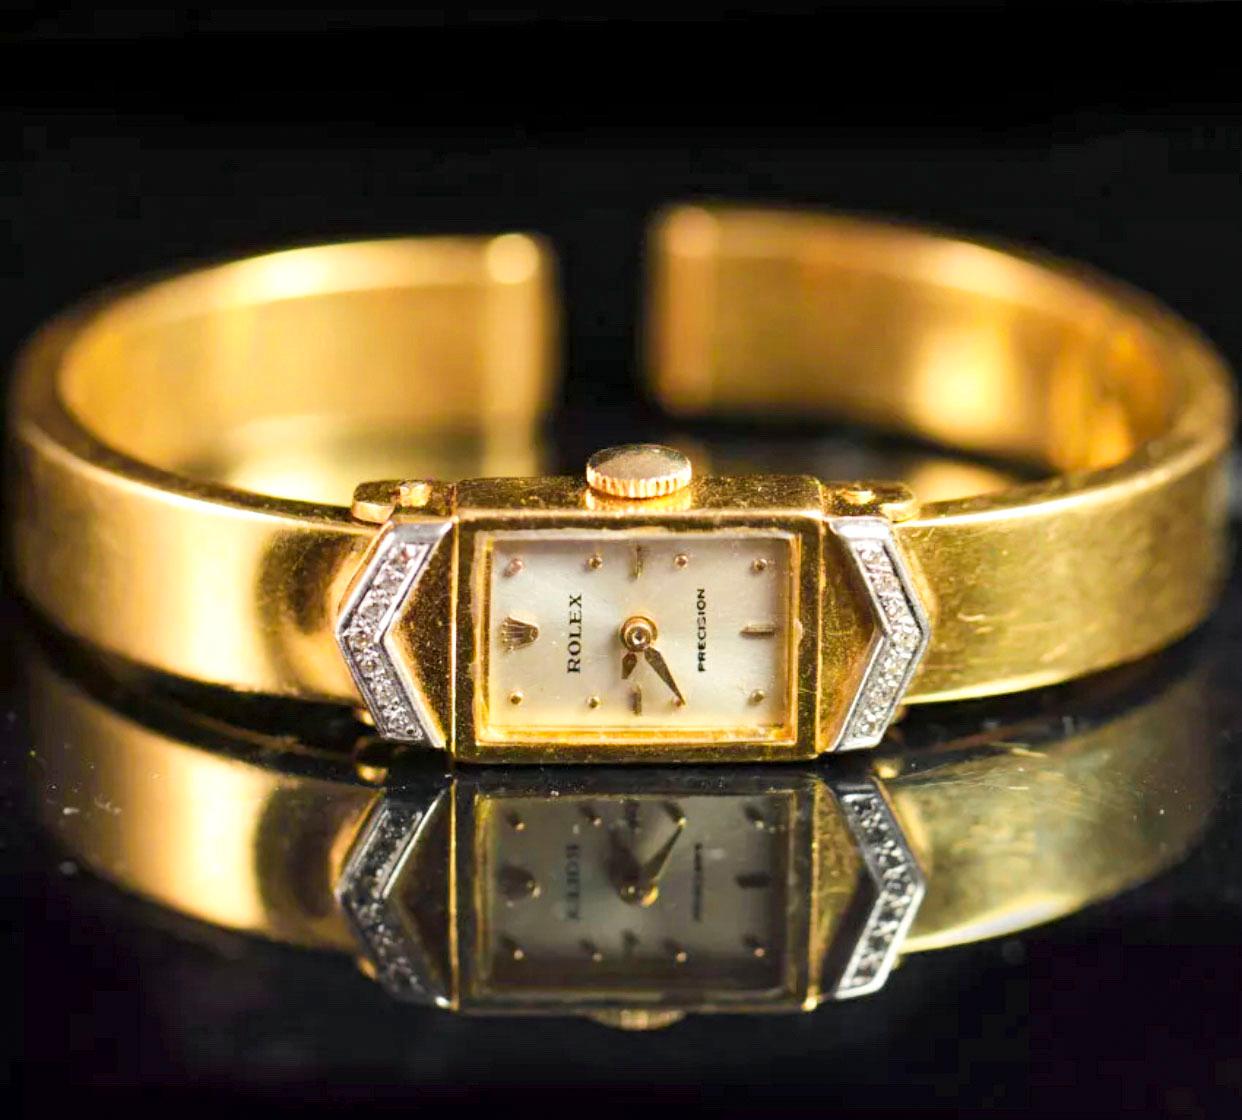 Timepiece Dimensions: 

Wrist size fits up to 180mm * Can be resized complimentary as necessary

Case Dimensions are : 20mm x 11mm 

The present timepiece is a very interesting and well made 1970s Vintage Rolex, made in 18kt yellow gold and fully